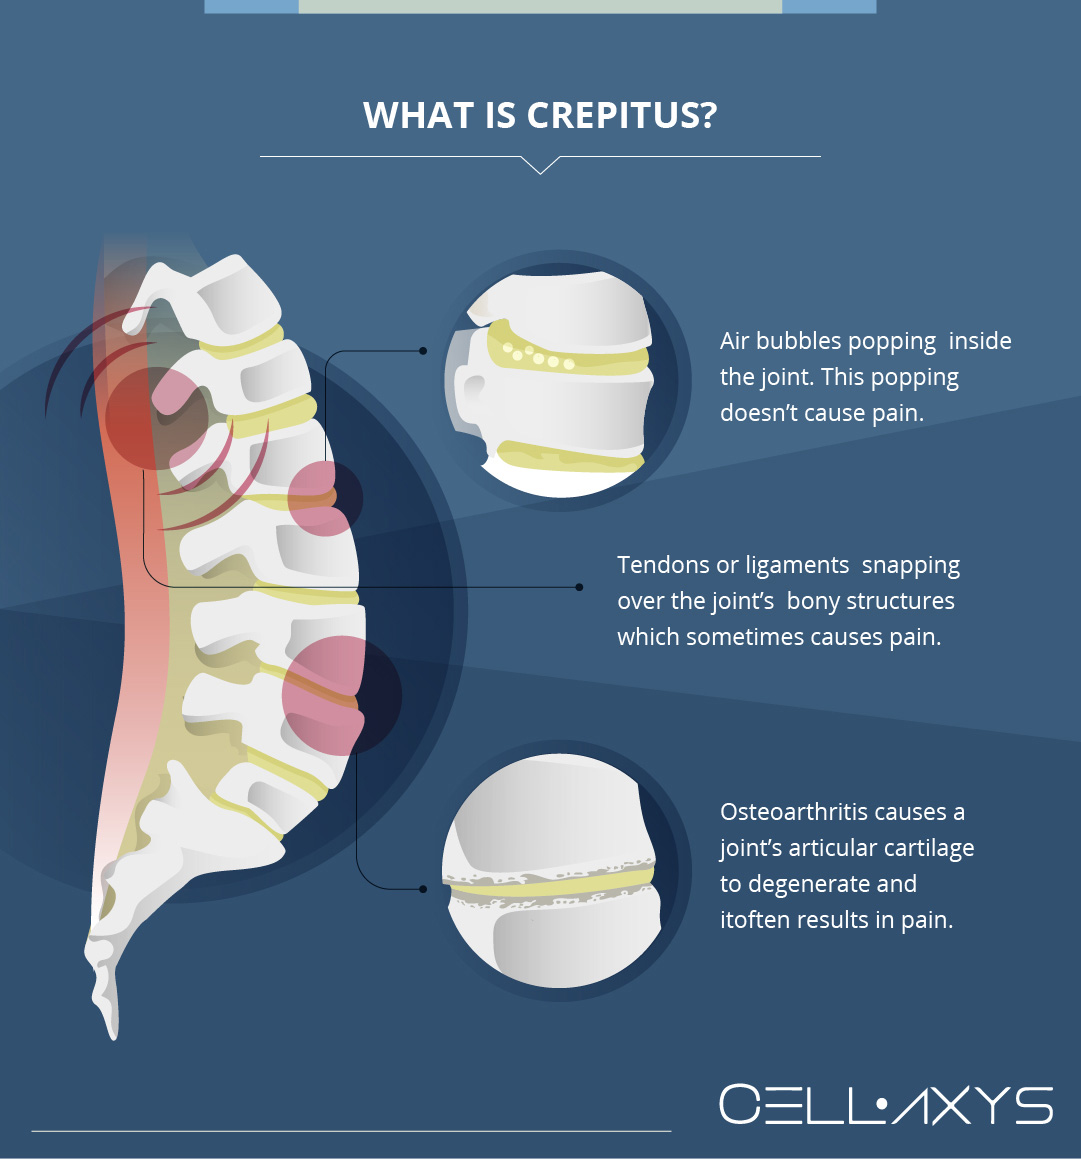 What is Crepitus